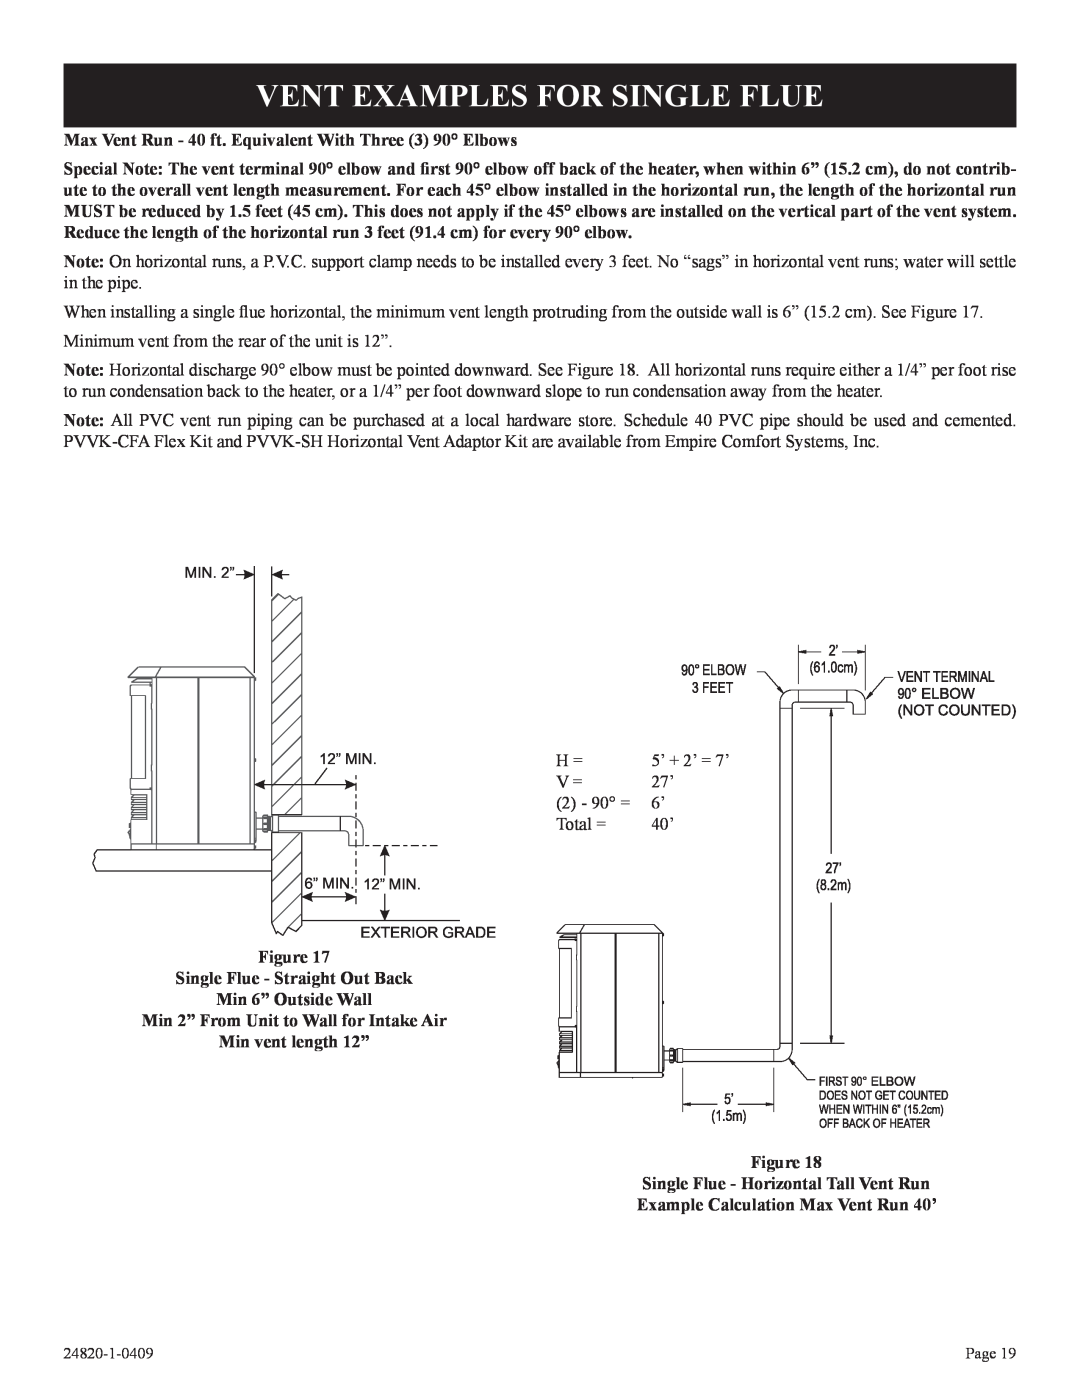 Empire Comfort Systems PV-28SV55-(C,G)(N,P)-1 Vent Examples For Single Flue, Figure Single Flue - Straight Out Back 